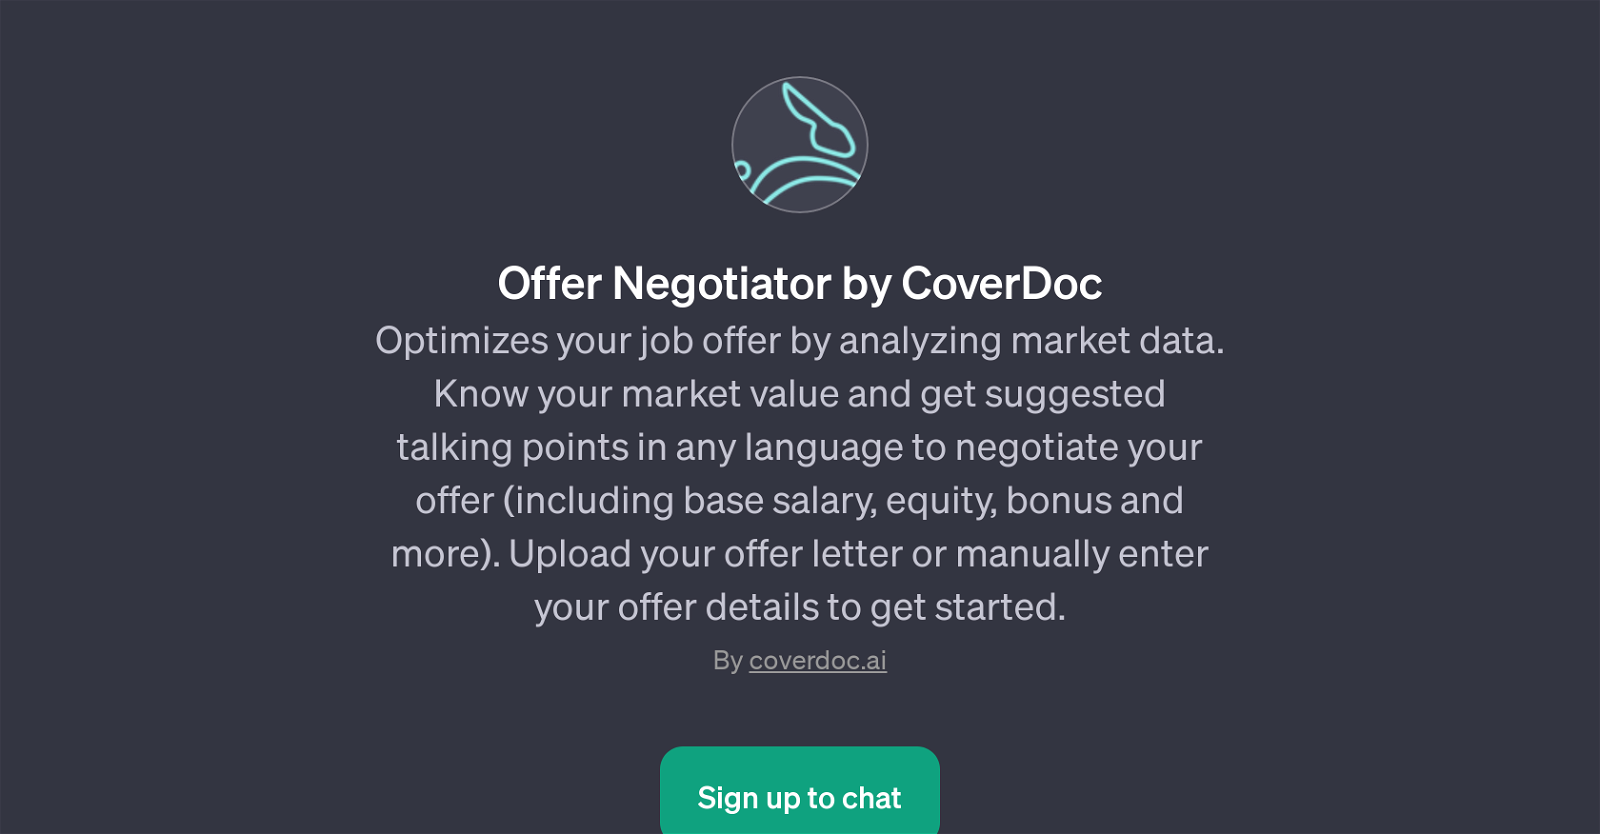 Offer Negotiator by CoverDoc website